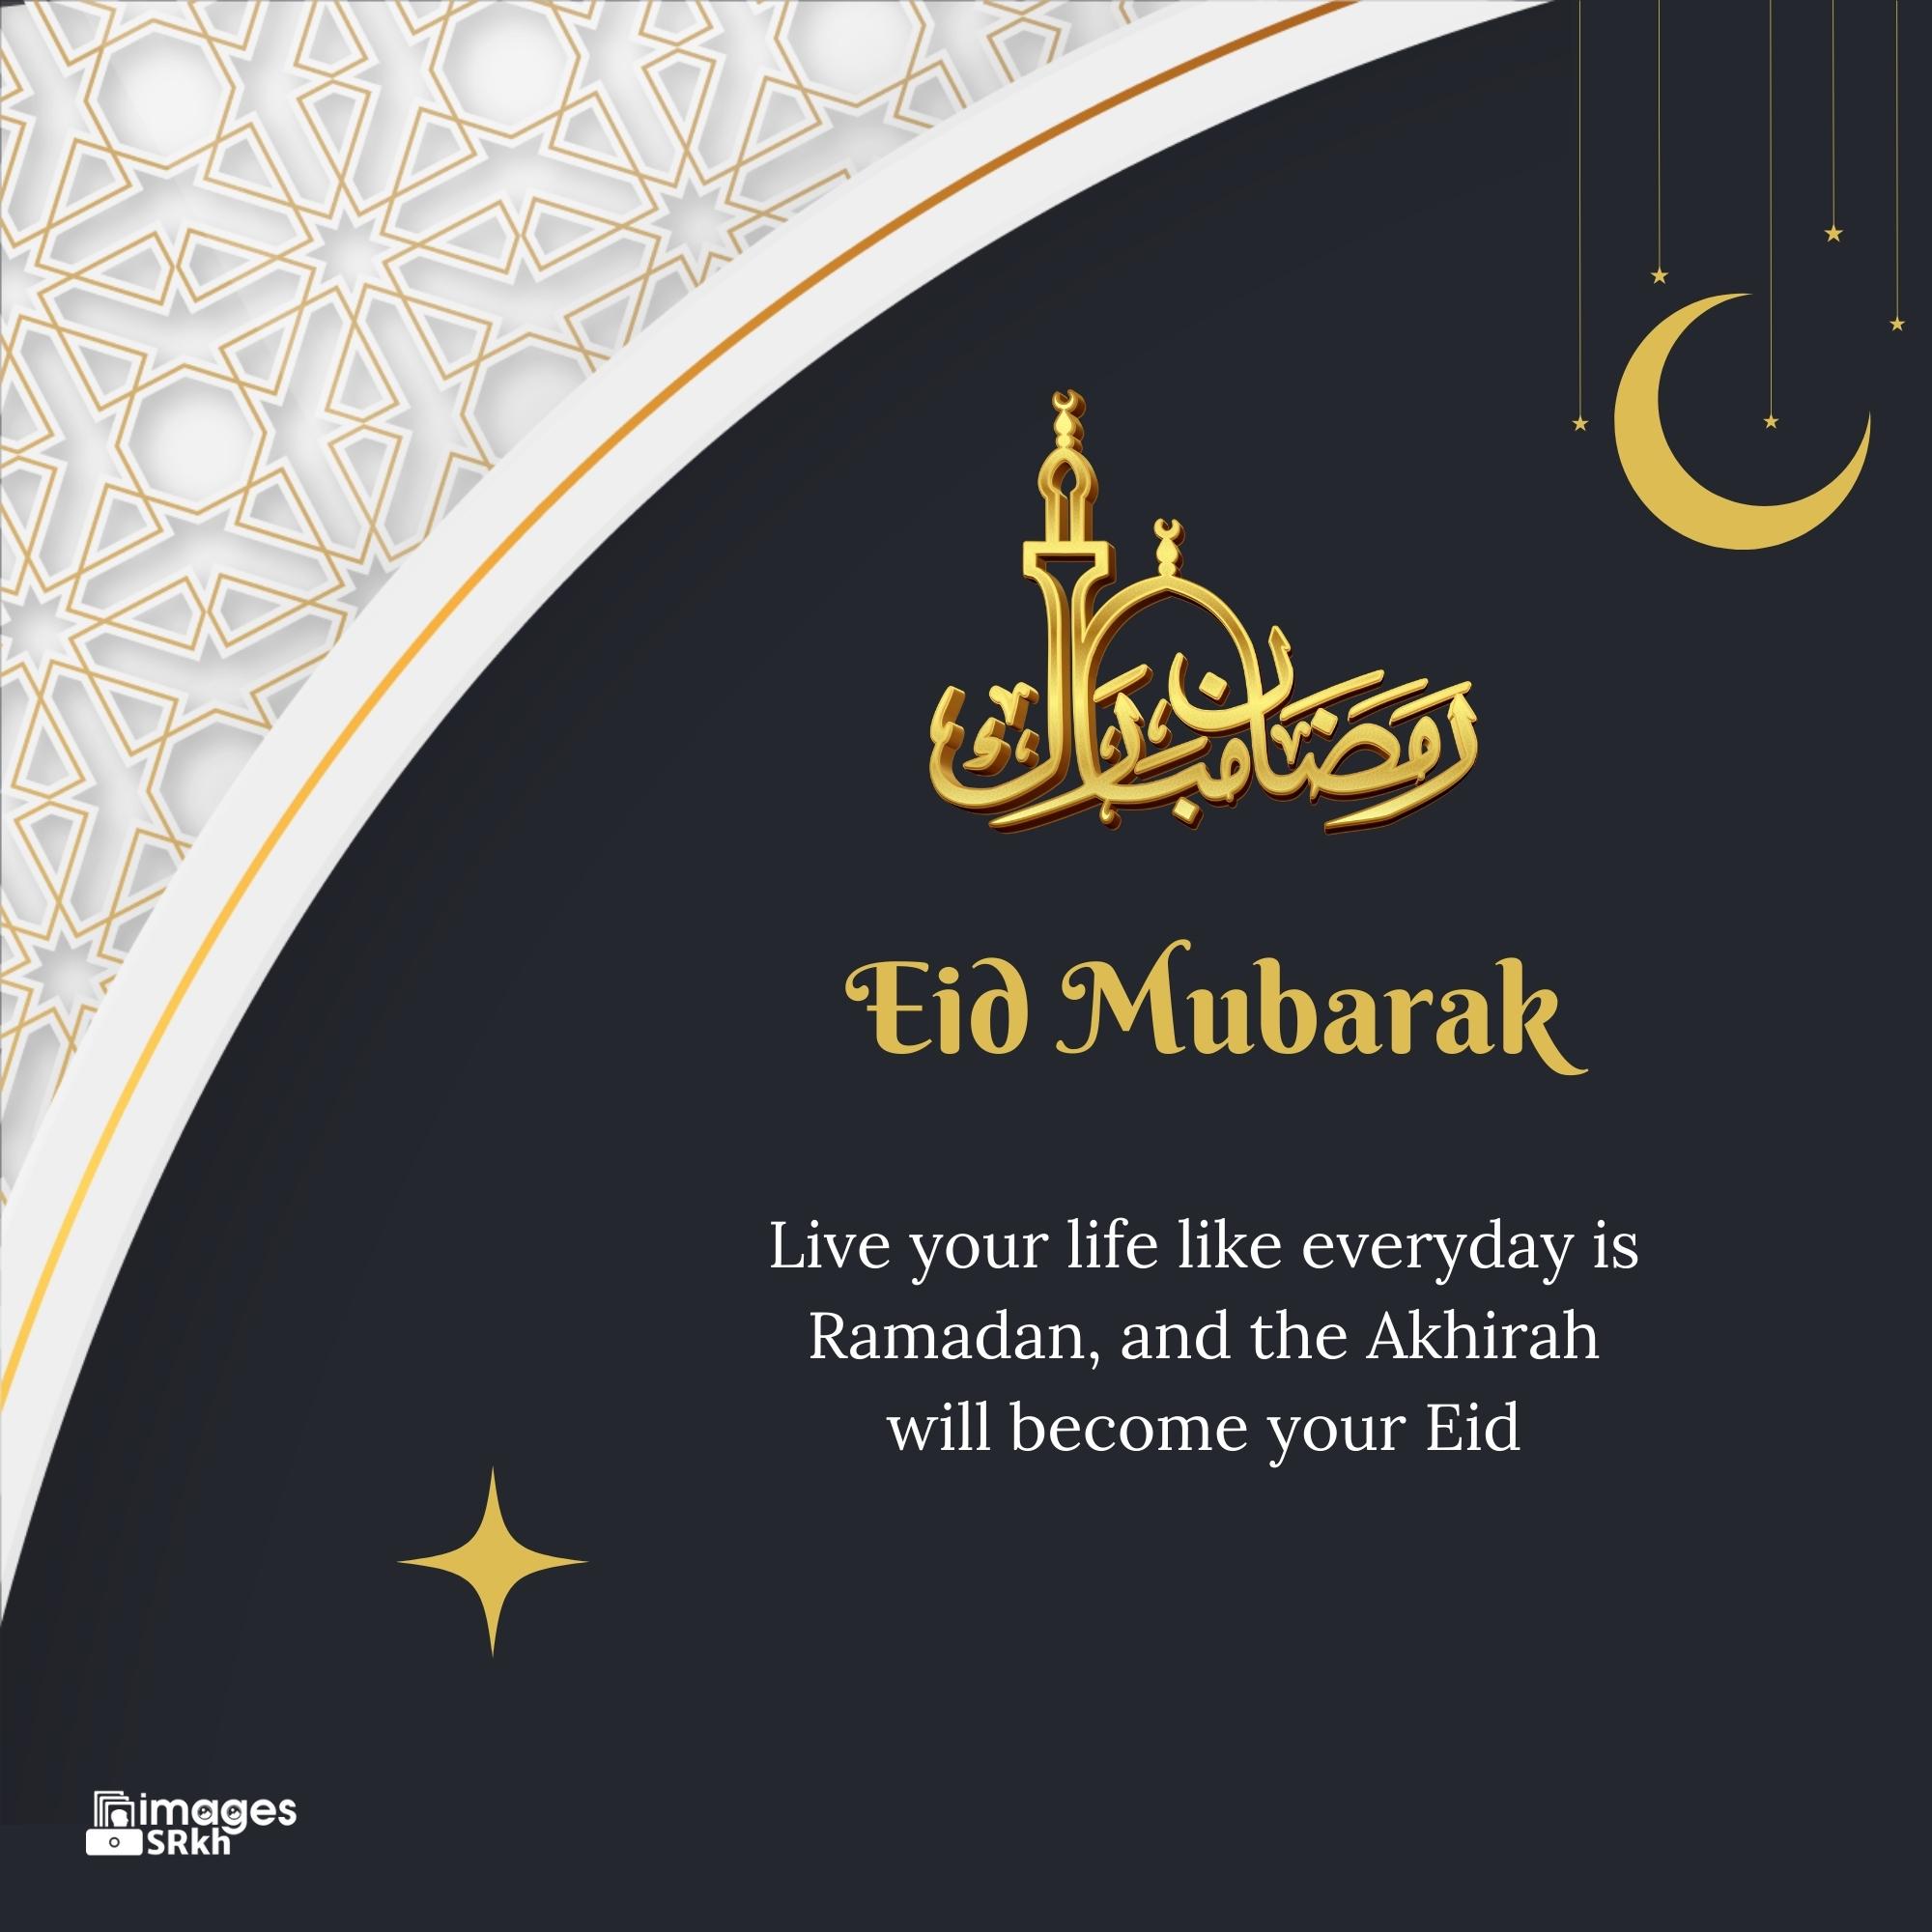 Eid Mubarak Images (2) | Download free in Hd Quality | imagesSRkh